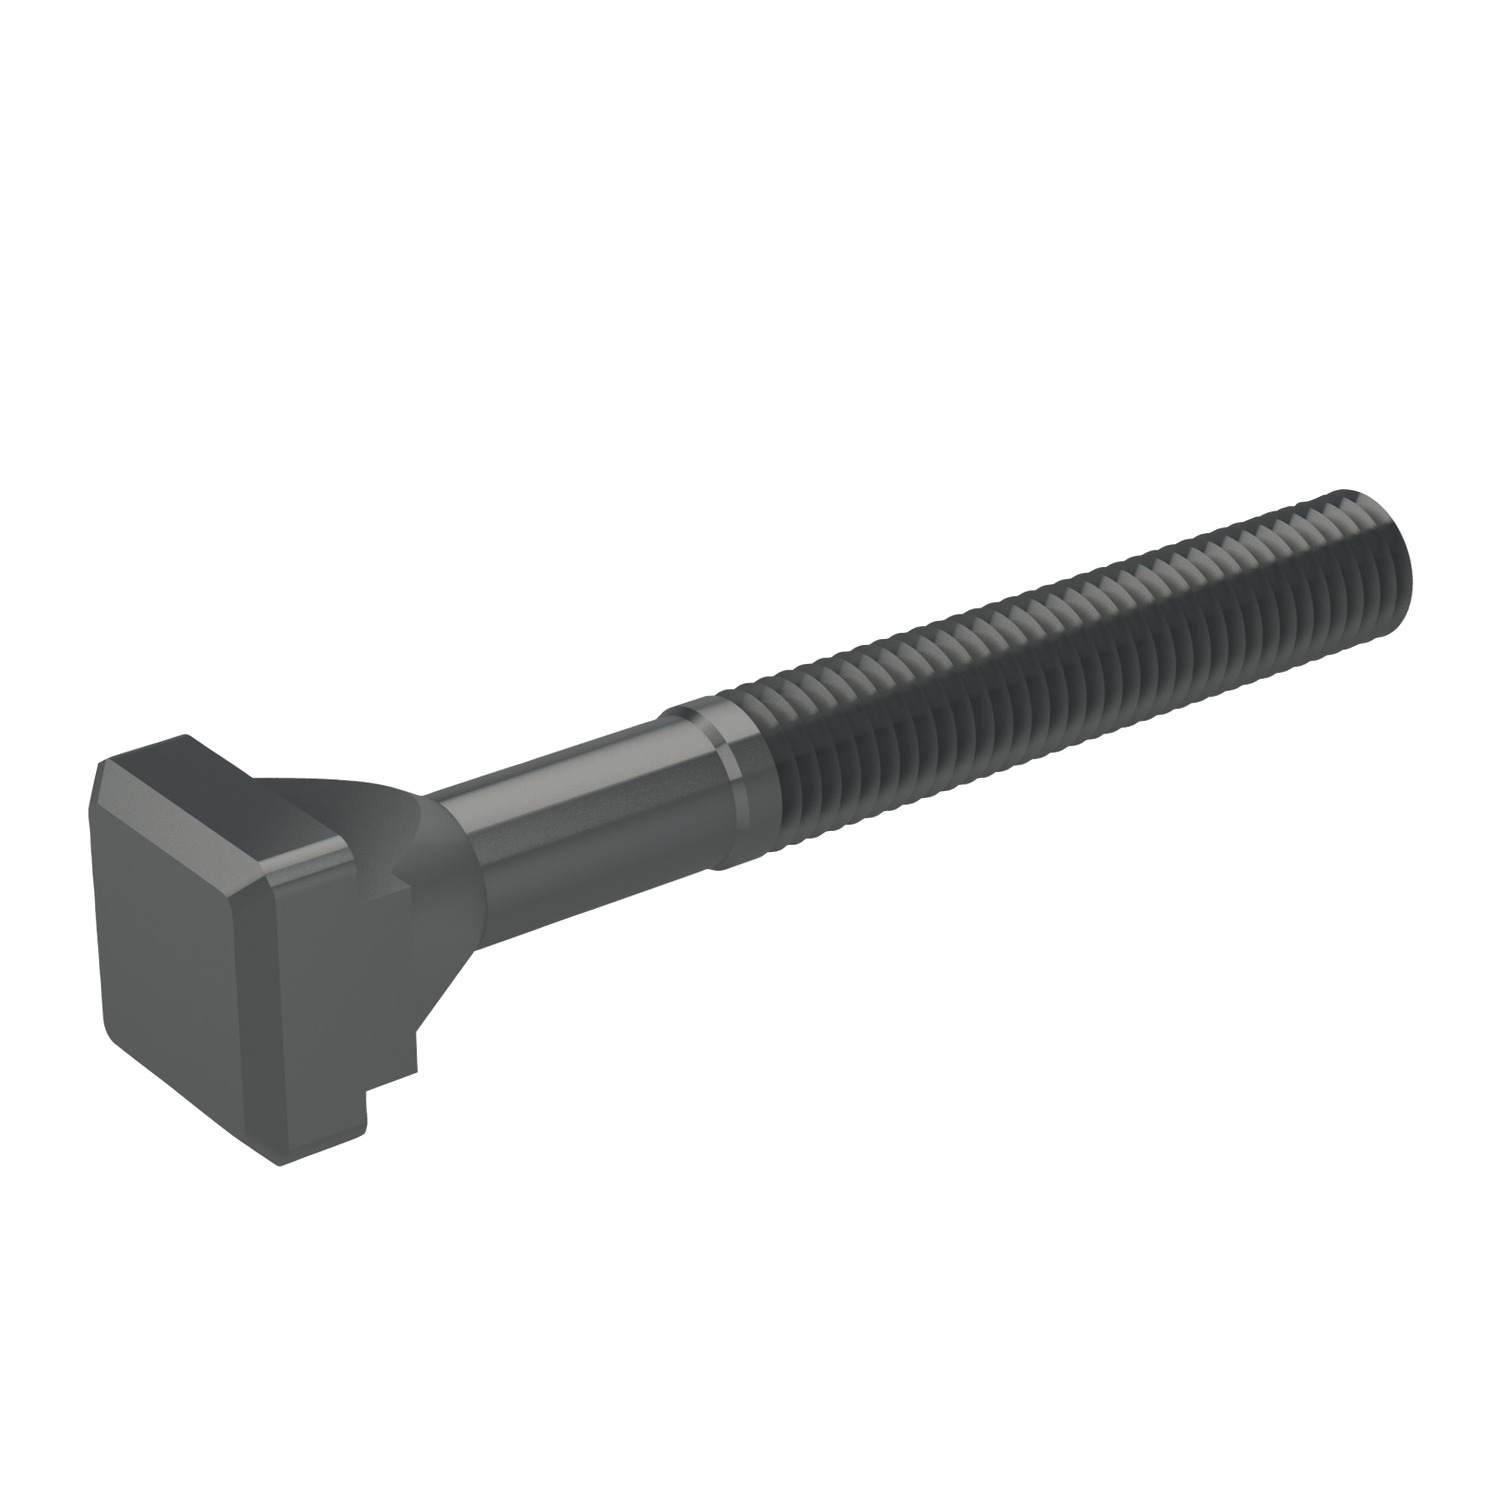 T-Slot Bolts Wixroyd offers two types of t-slot bolts one in strength class 8.8/10 and the extra strength version in 12,9 class.